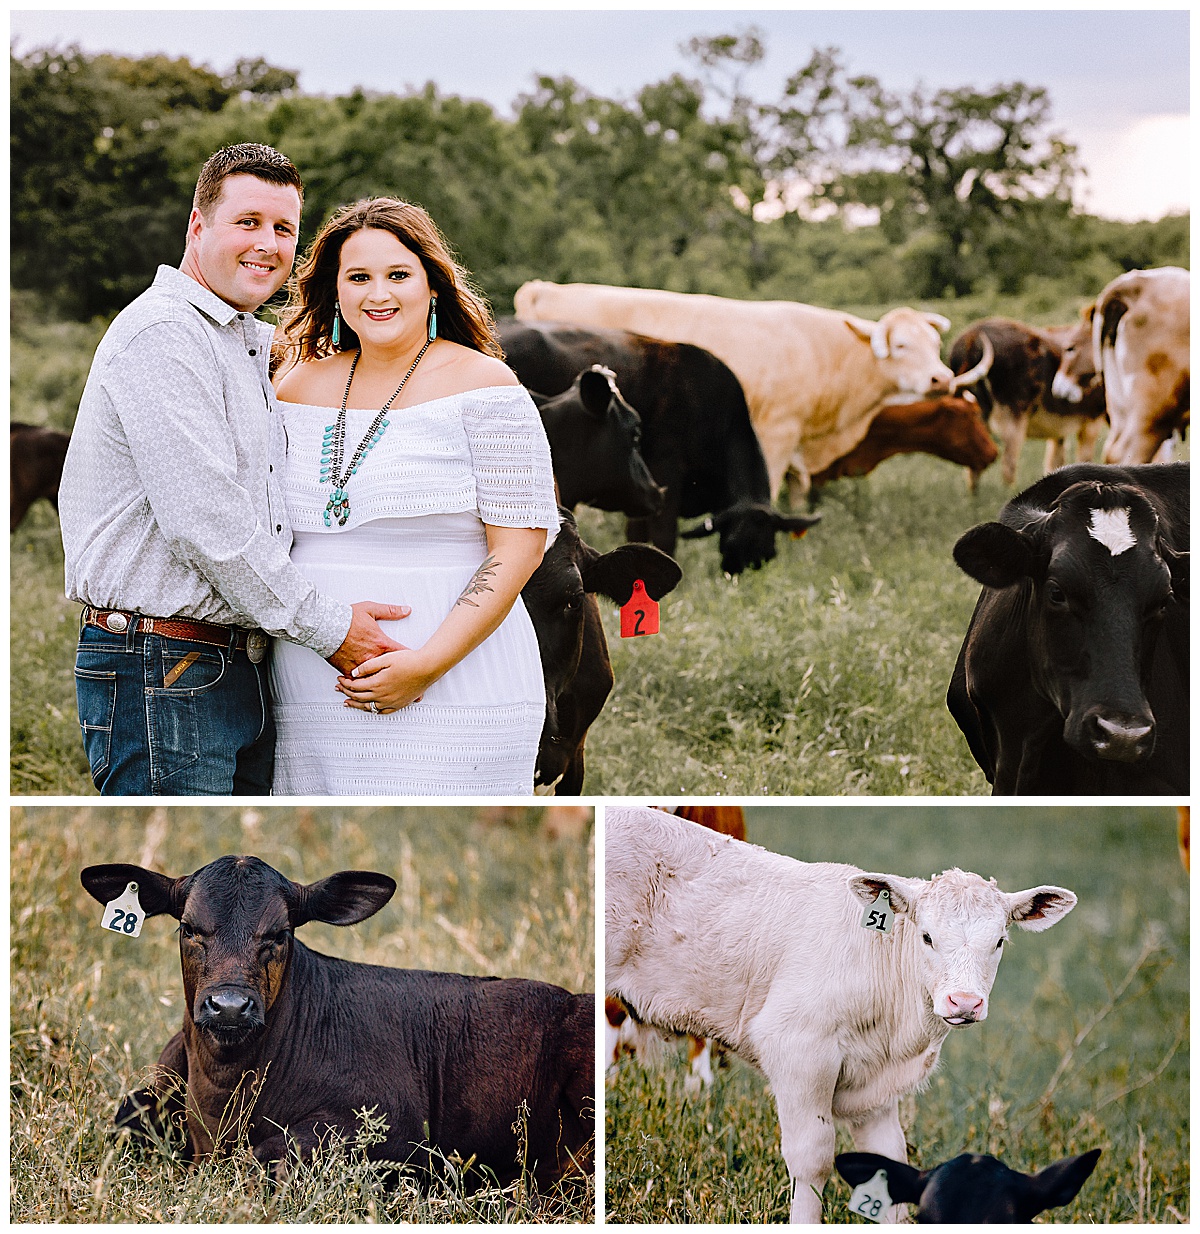 Rustic-Maternity-Session-Texas-Sunset-Carly-Barton-Photography_0067.jpg